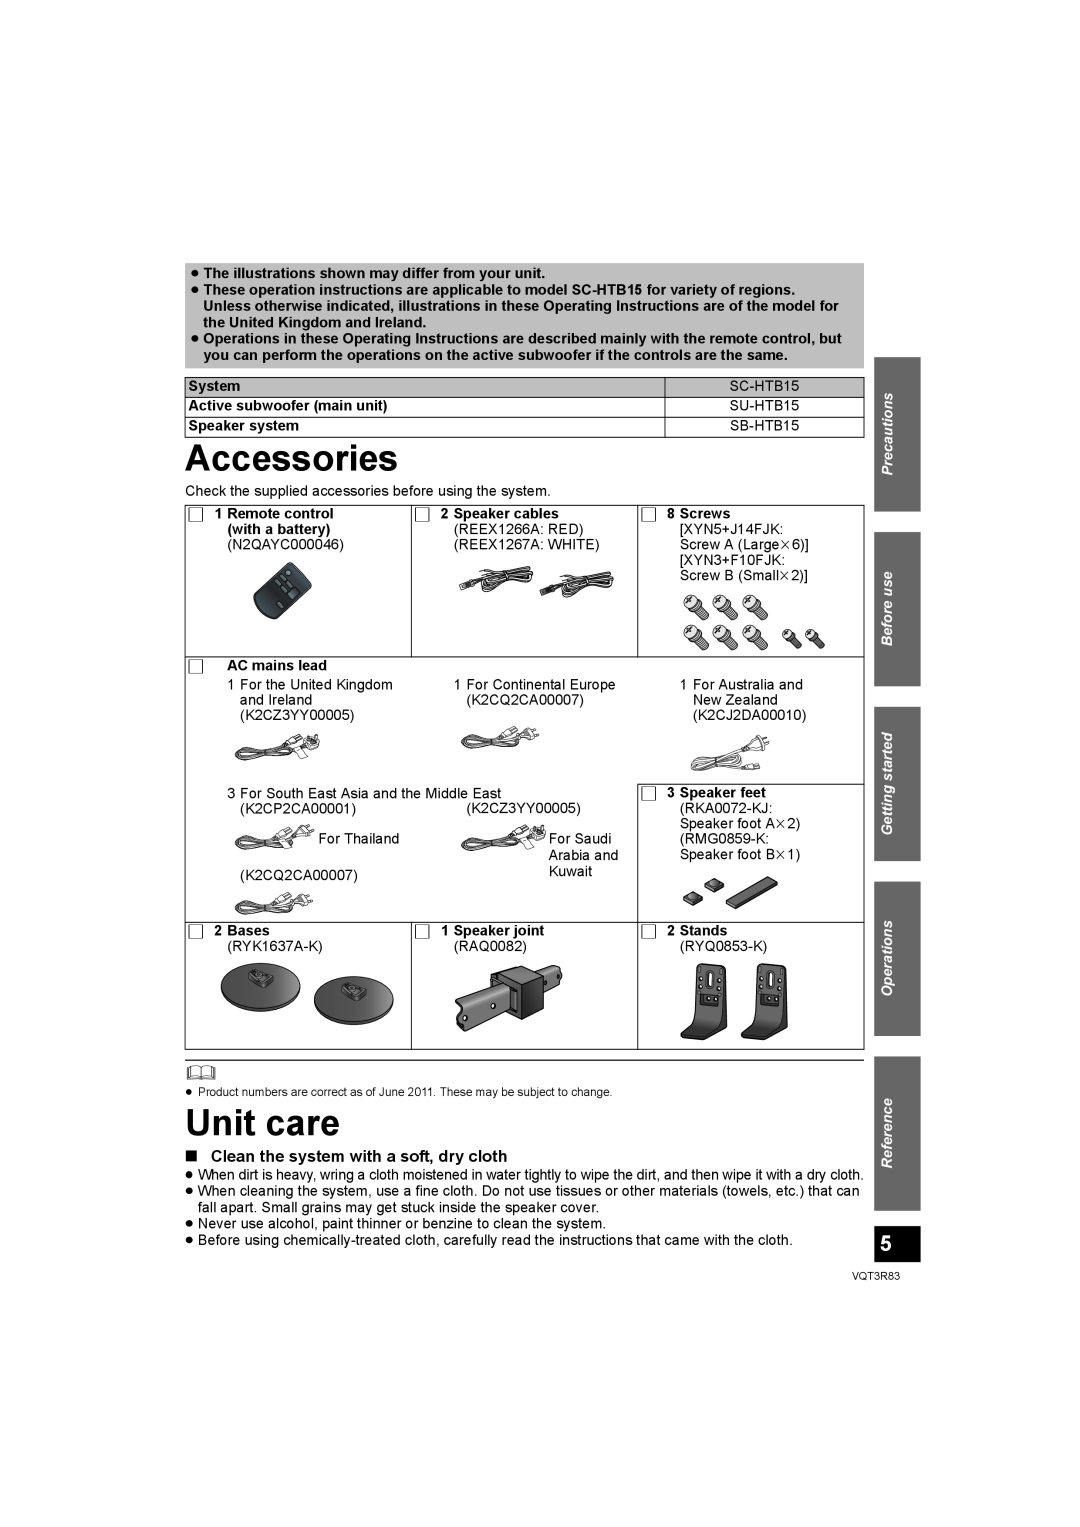 Panasonic SC-HTB15 operating instructions Accessories, Unit care, Clean the system with a soft, dry cloth, Reference 